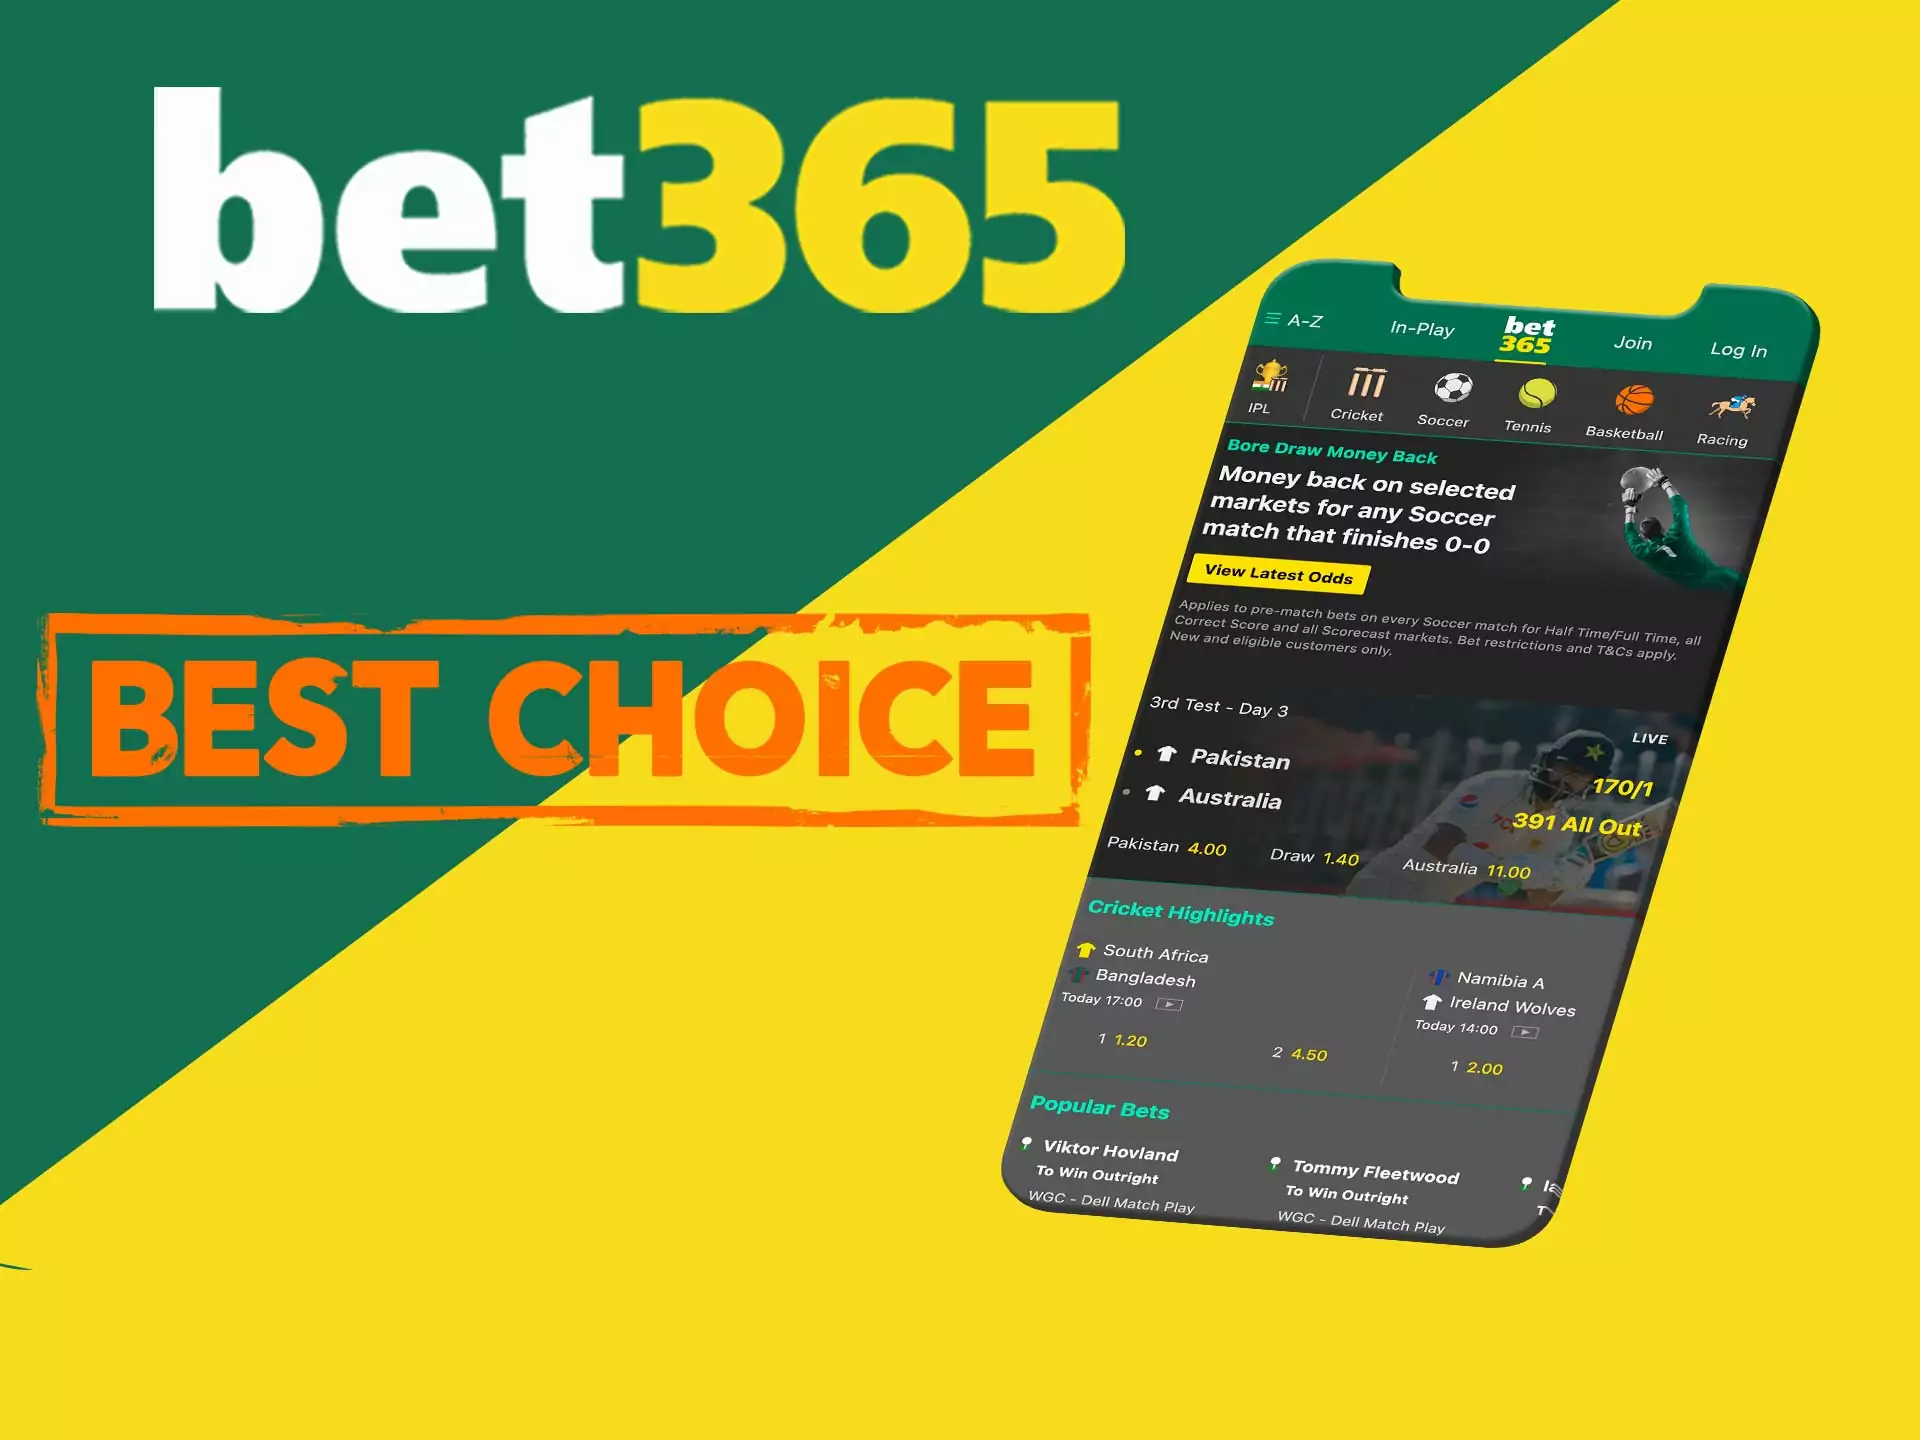 Bet365 is a good choice, has the modern features of a betting app.